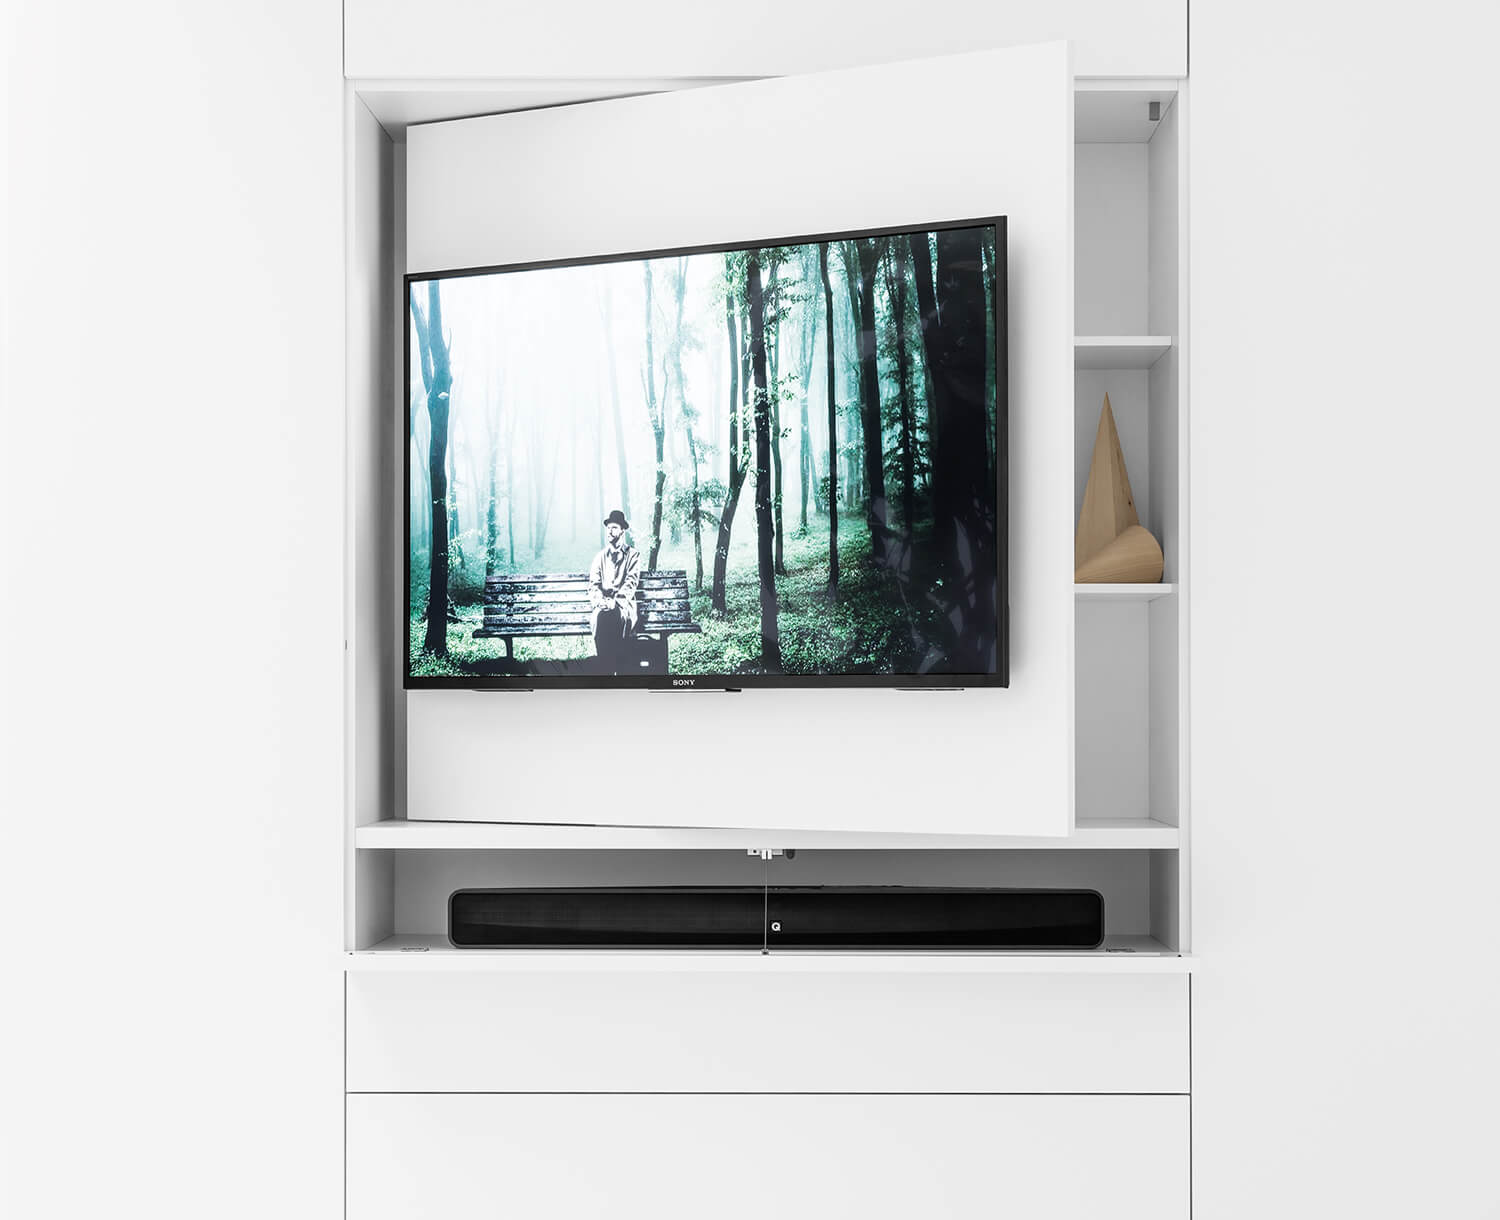 The TV panel rotates to reveal extra storage in the back.